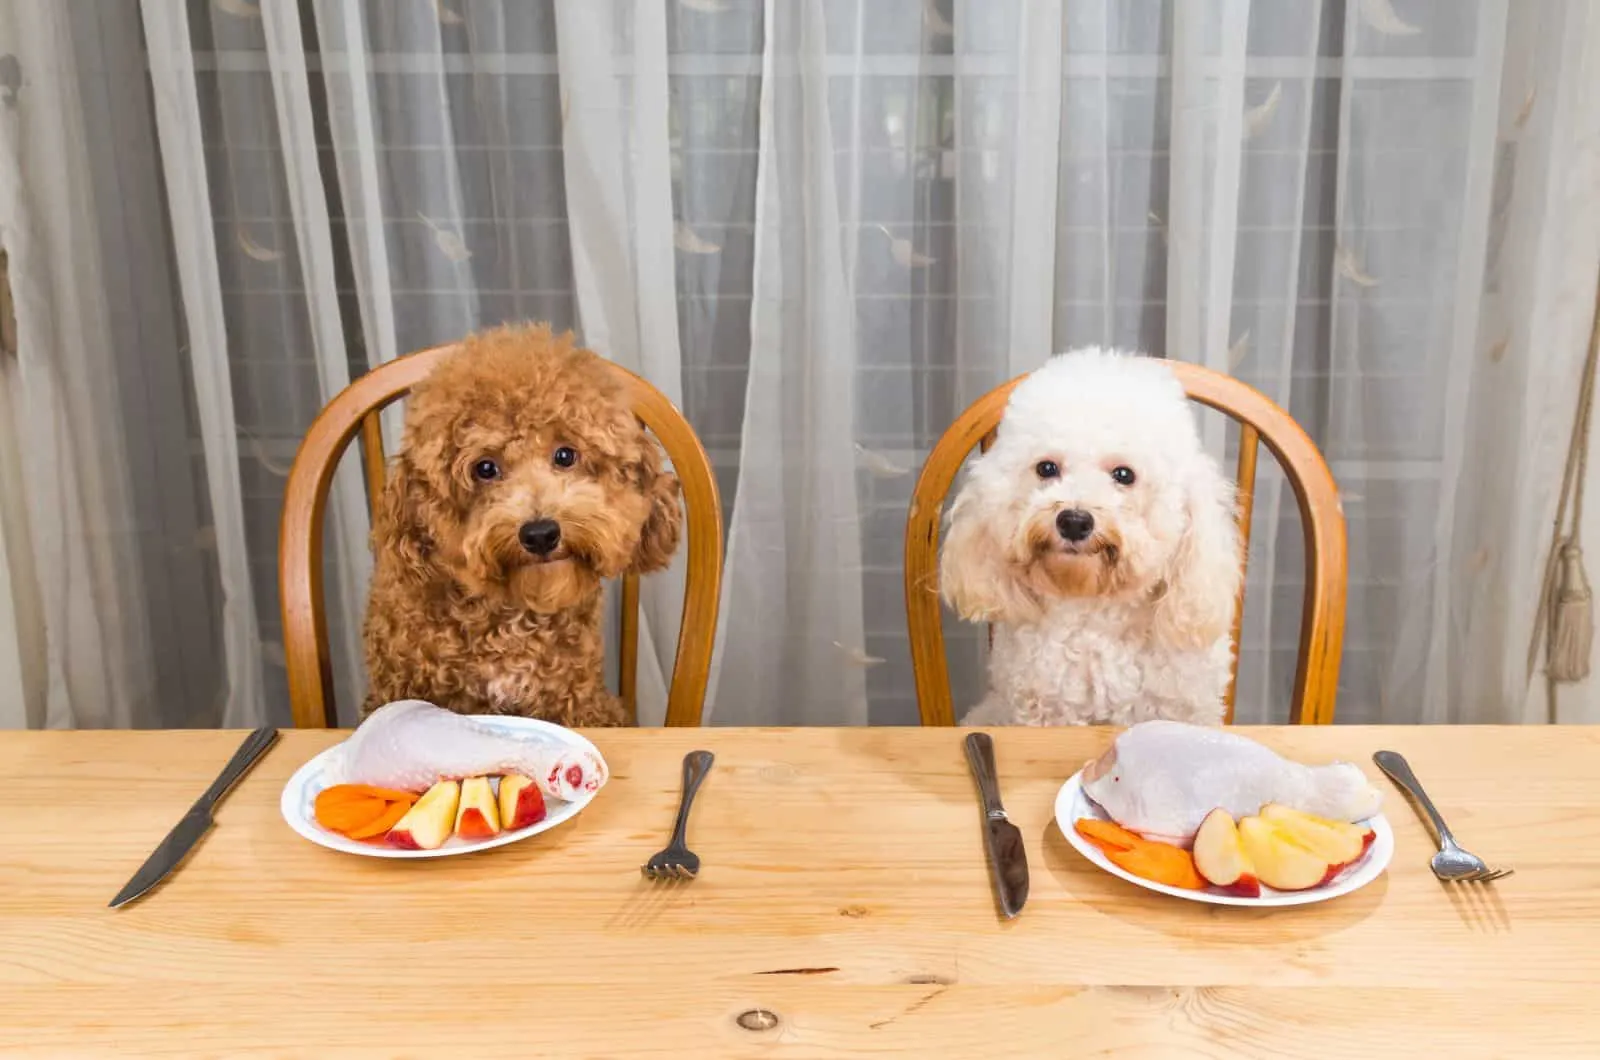 two Poodles sitting and waiting for food